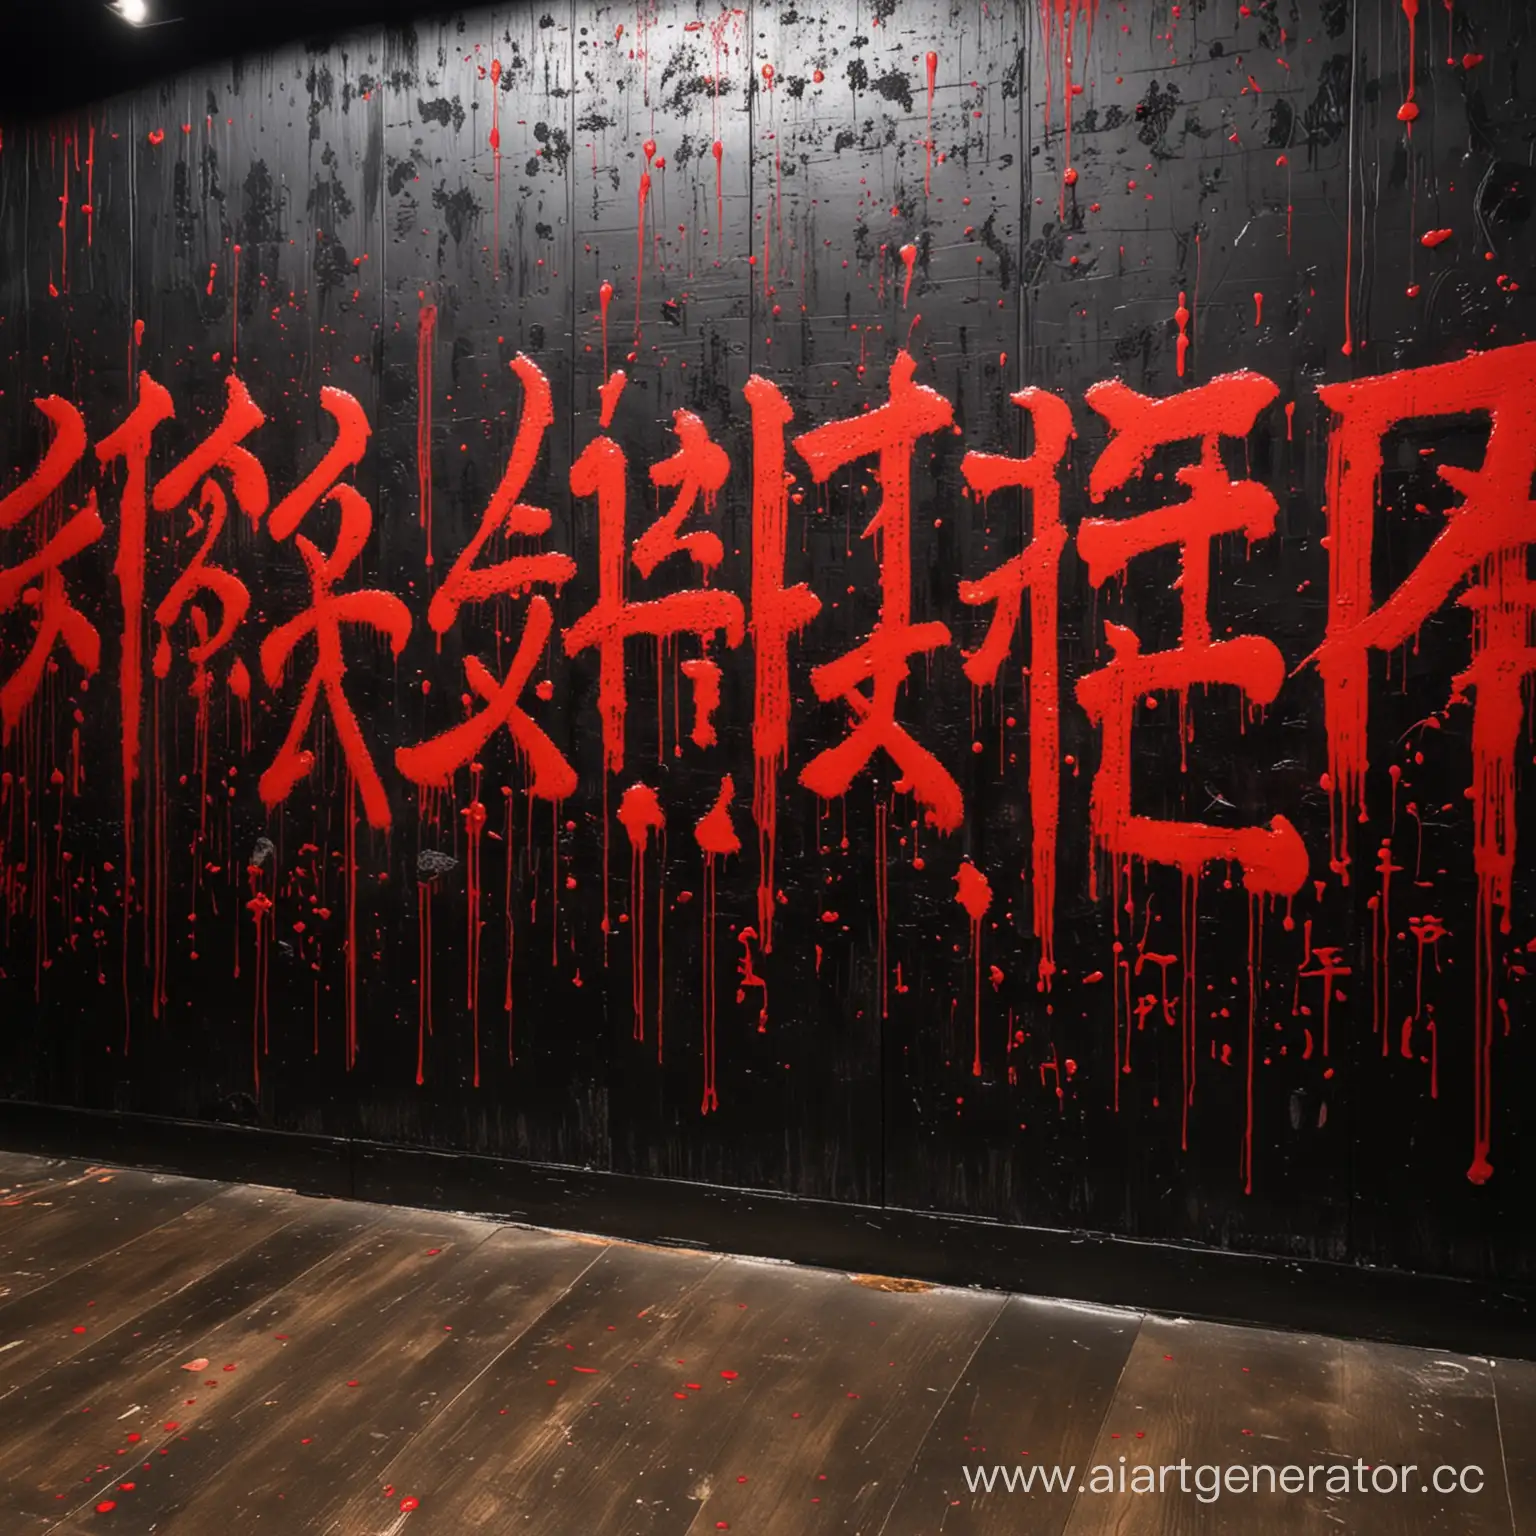 Grim-Scene-BloodStained-Black-Wall-with-Bold-Red-Japanese-Characters